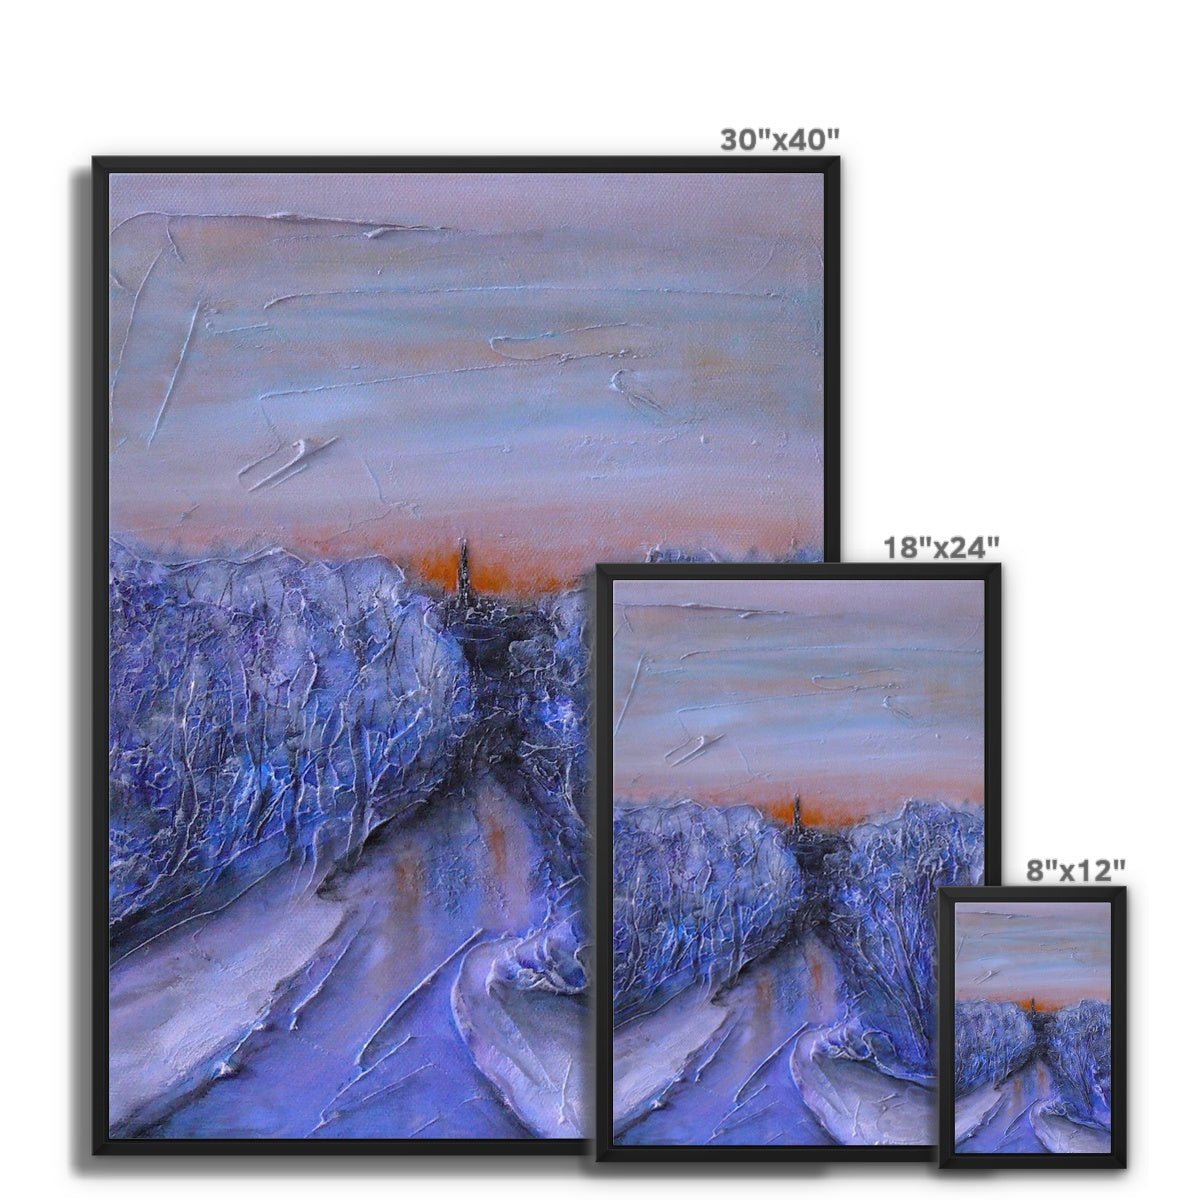 A Frozen River Kelvin Painting | Framed Canvas From Scotland-Floating Framed Canvas Prints-Edinburgh & Glasgow Art Gallery-Paintings, Prints, Homeware, Art Gifts From Scotland By Scottish Artist Kevin Hunter